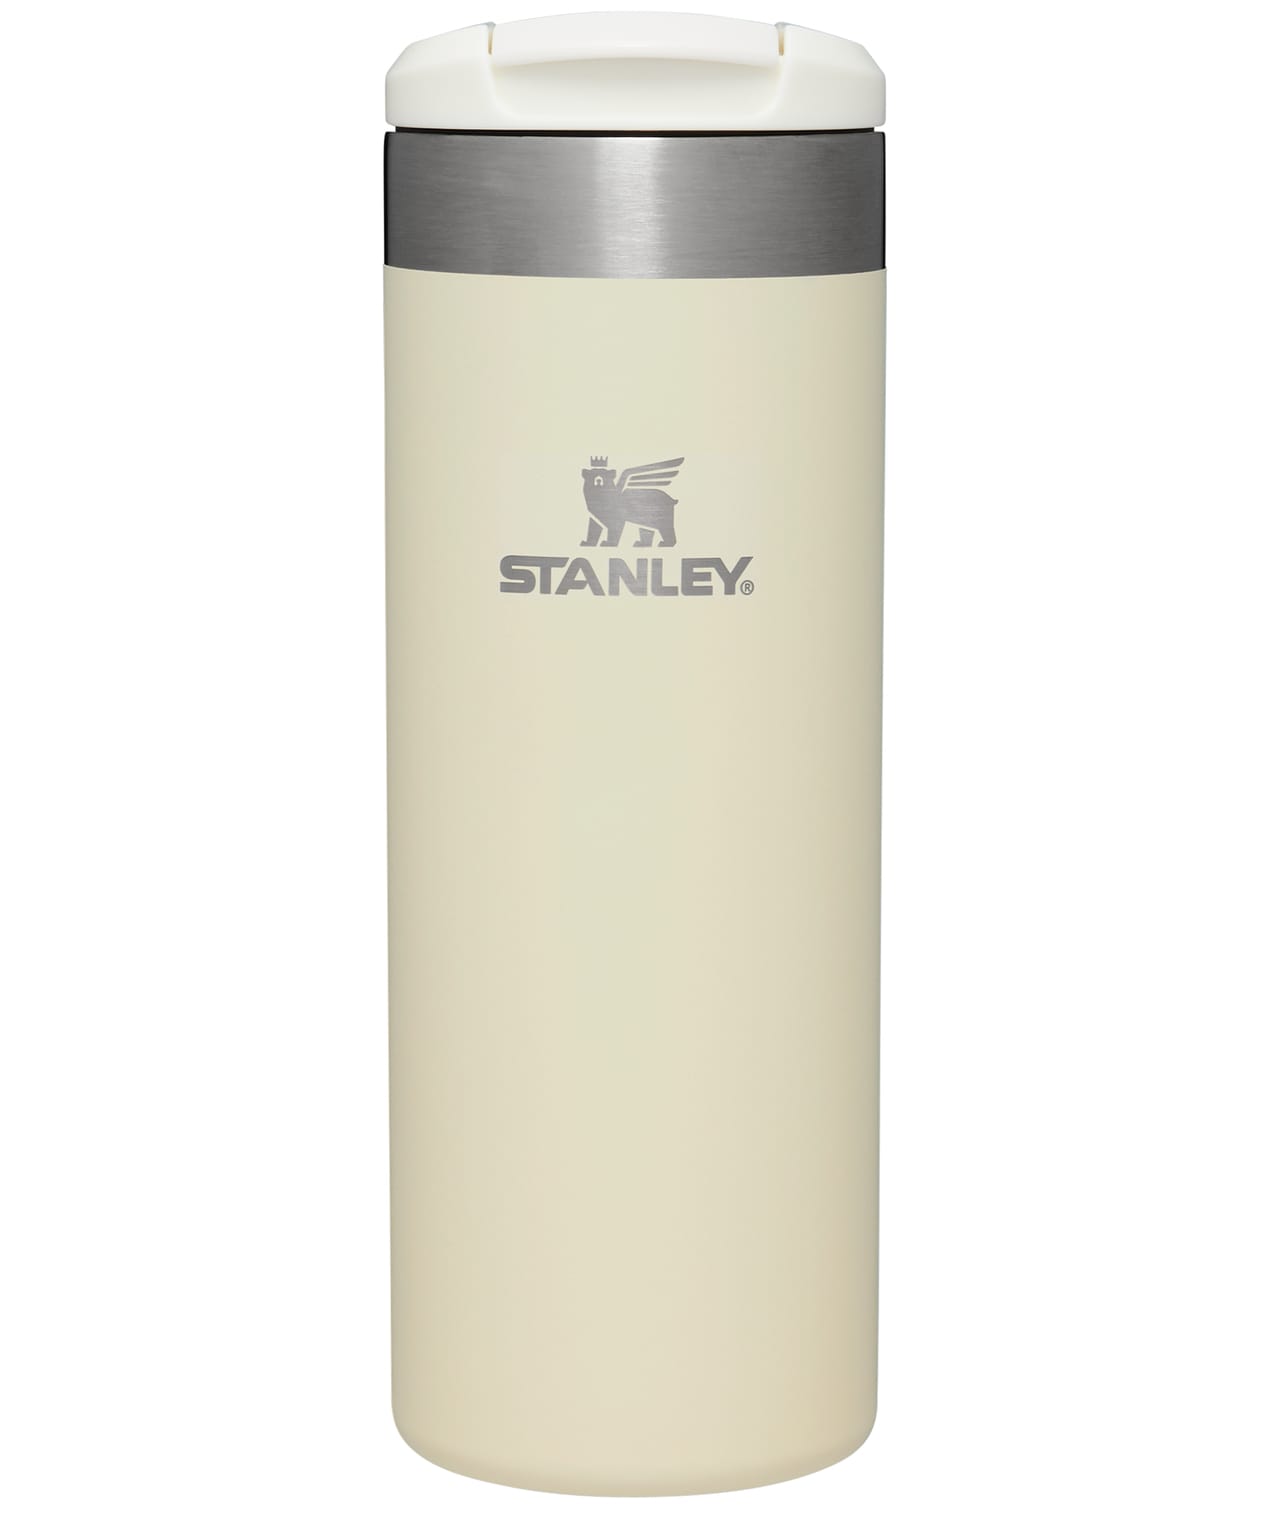 Stanley 20-fl oz Stainless Steel Insulated Water Bottle at